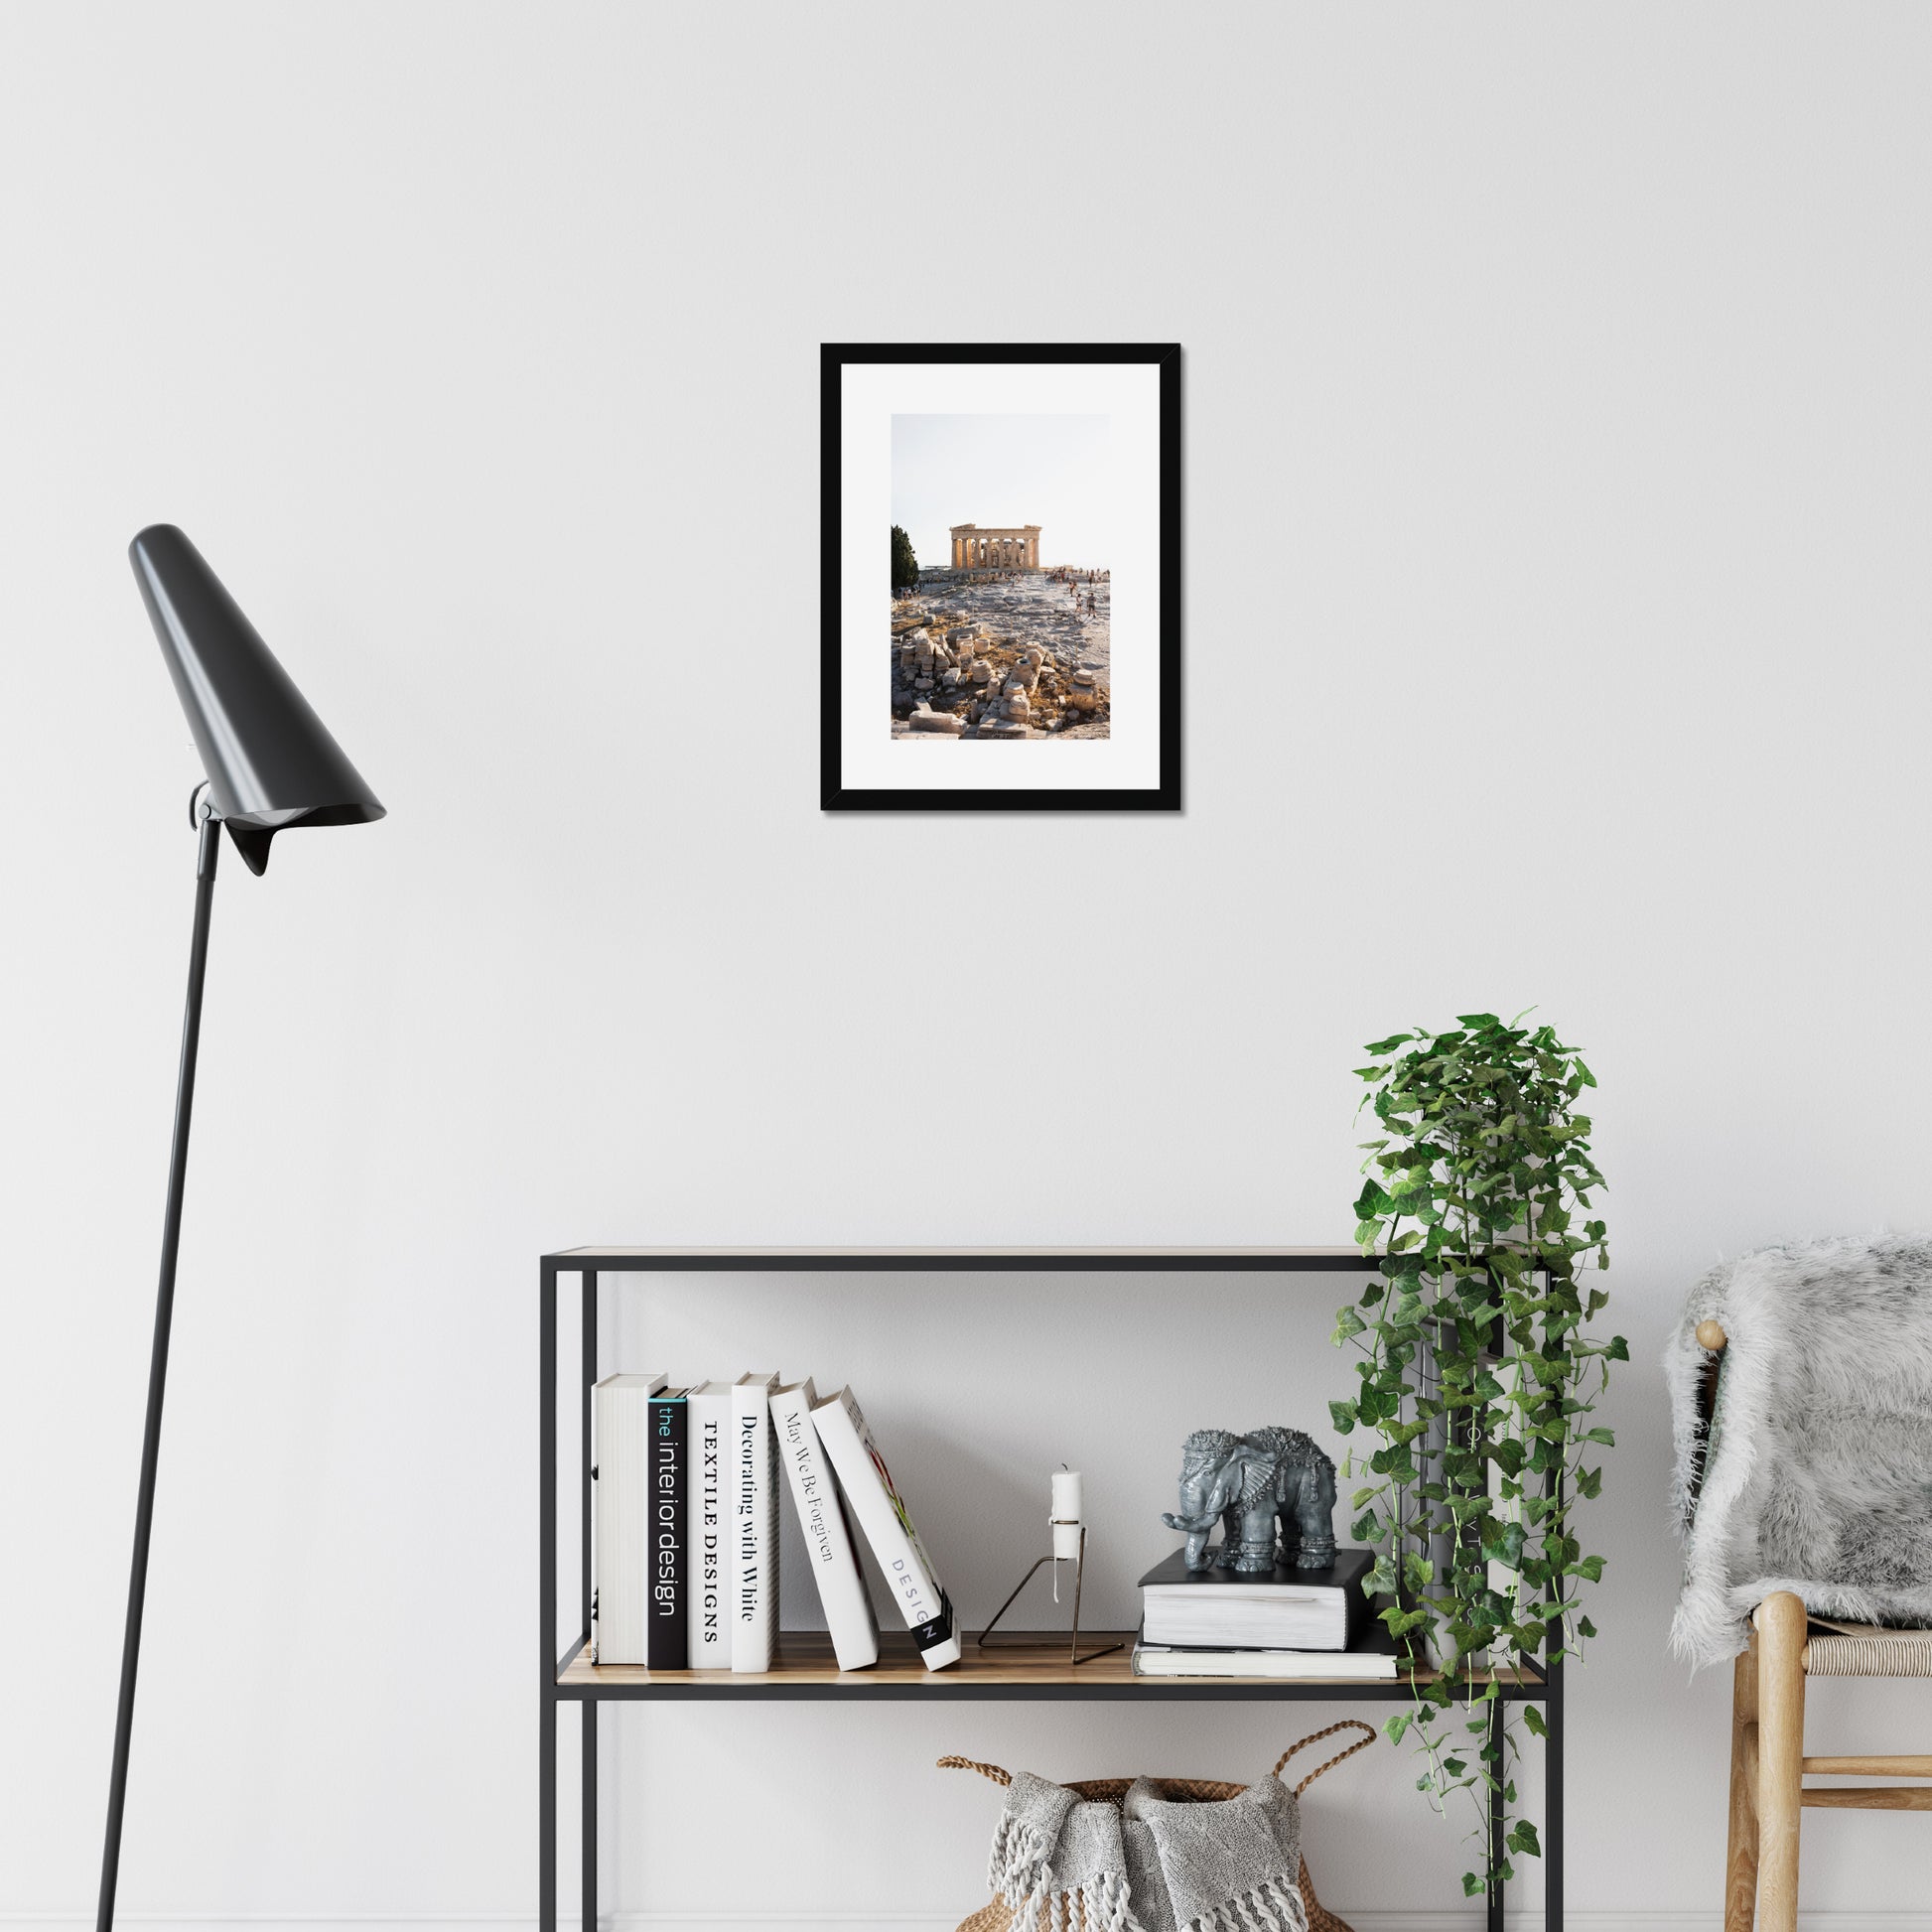 Mockup of wall art showing a small black wooden frame that is hanging on the wall of a living room and contains a photo of the Parthenon on the hill of Acropolis in Athens Greece